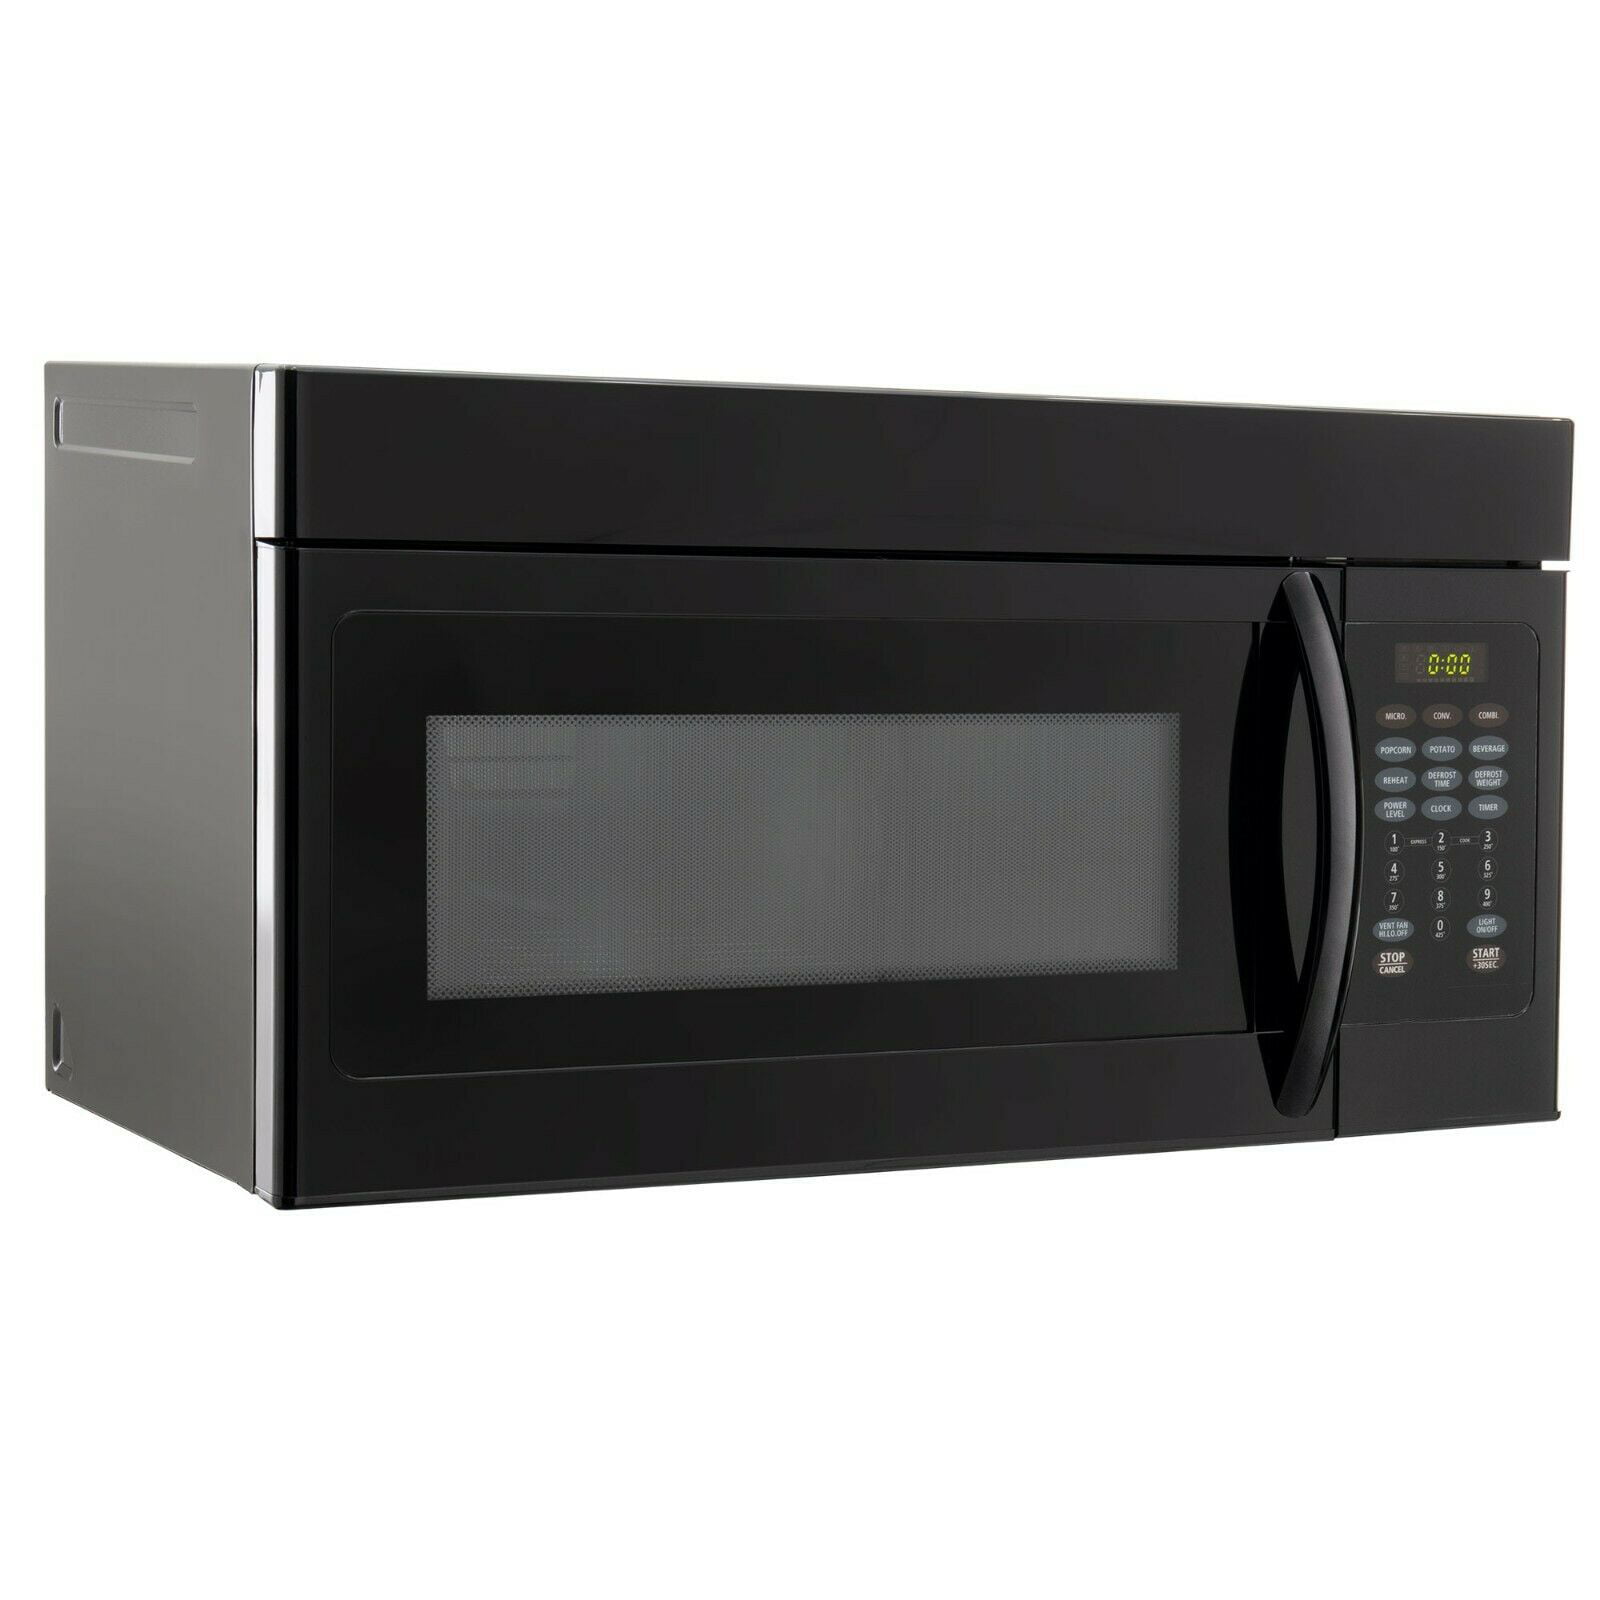 RV Microwave Over the Range Convection Oven 30" 120V Black Finish Above Stove